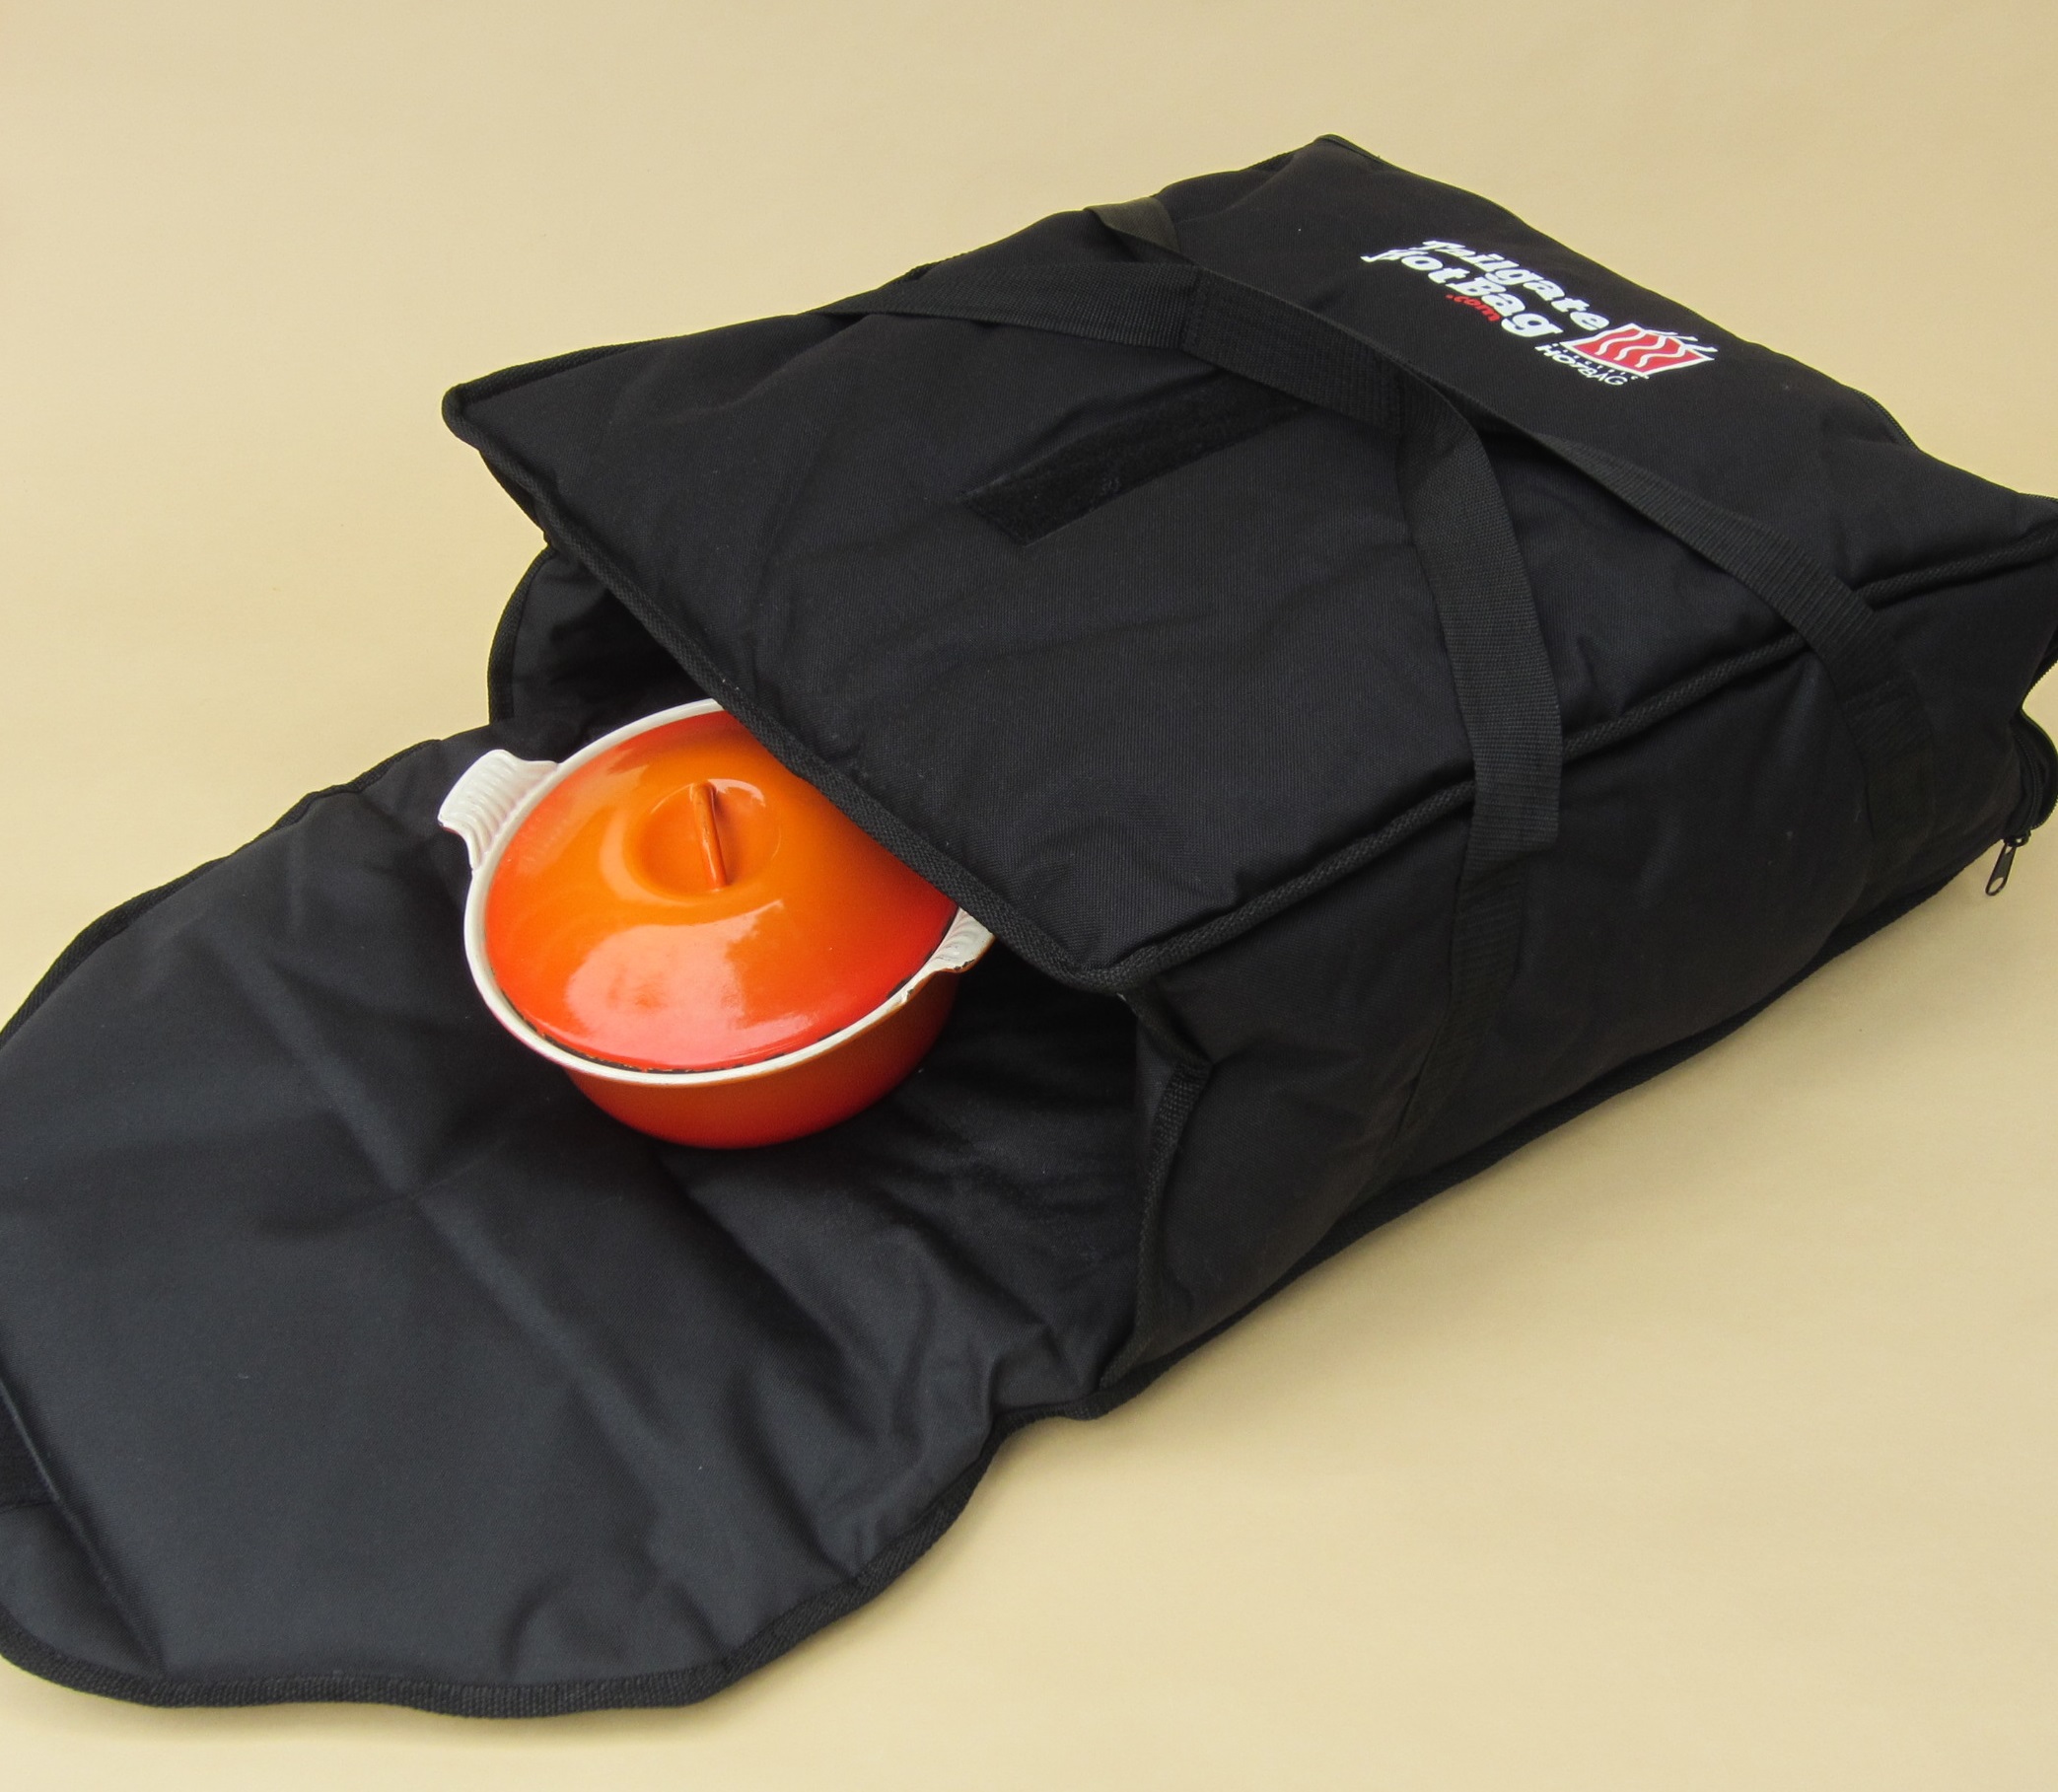 The Extra Wide Tailgate Hotbag is 21" x 19" x 8.5" and opens wide handle large food items or pizzas